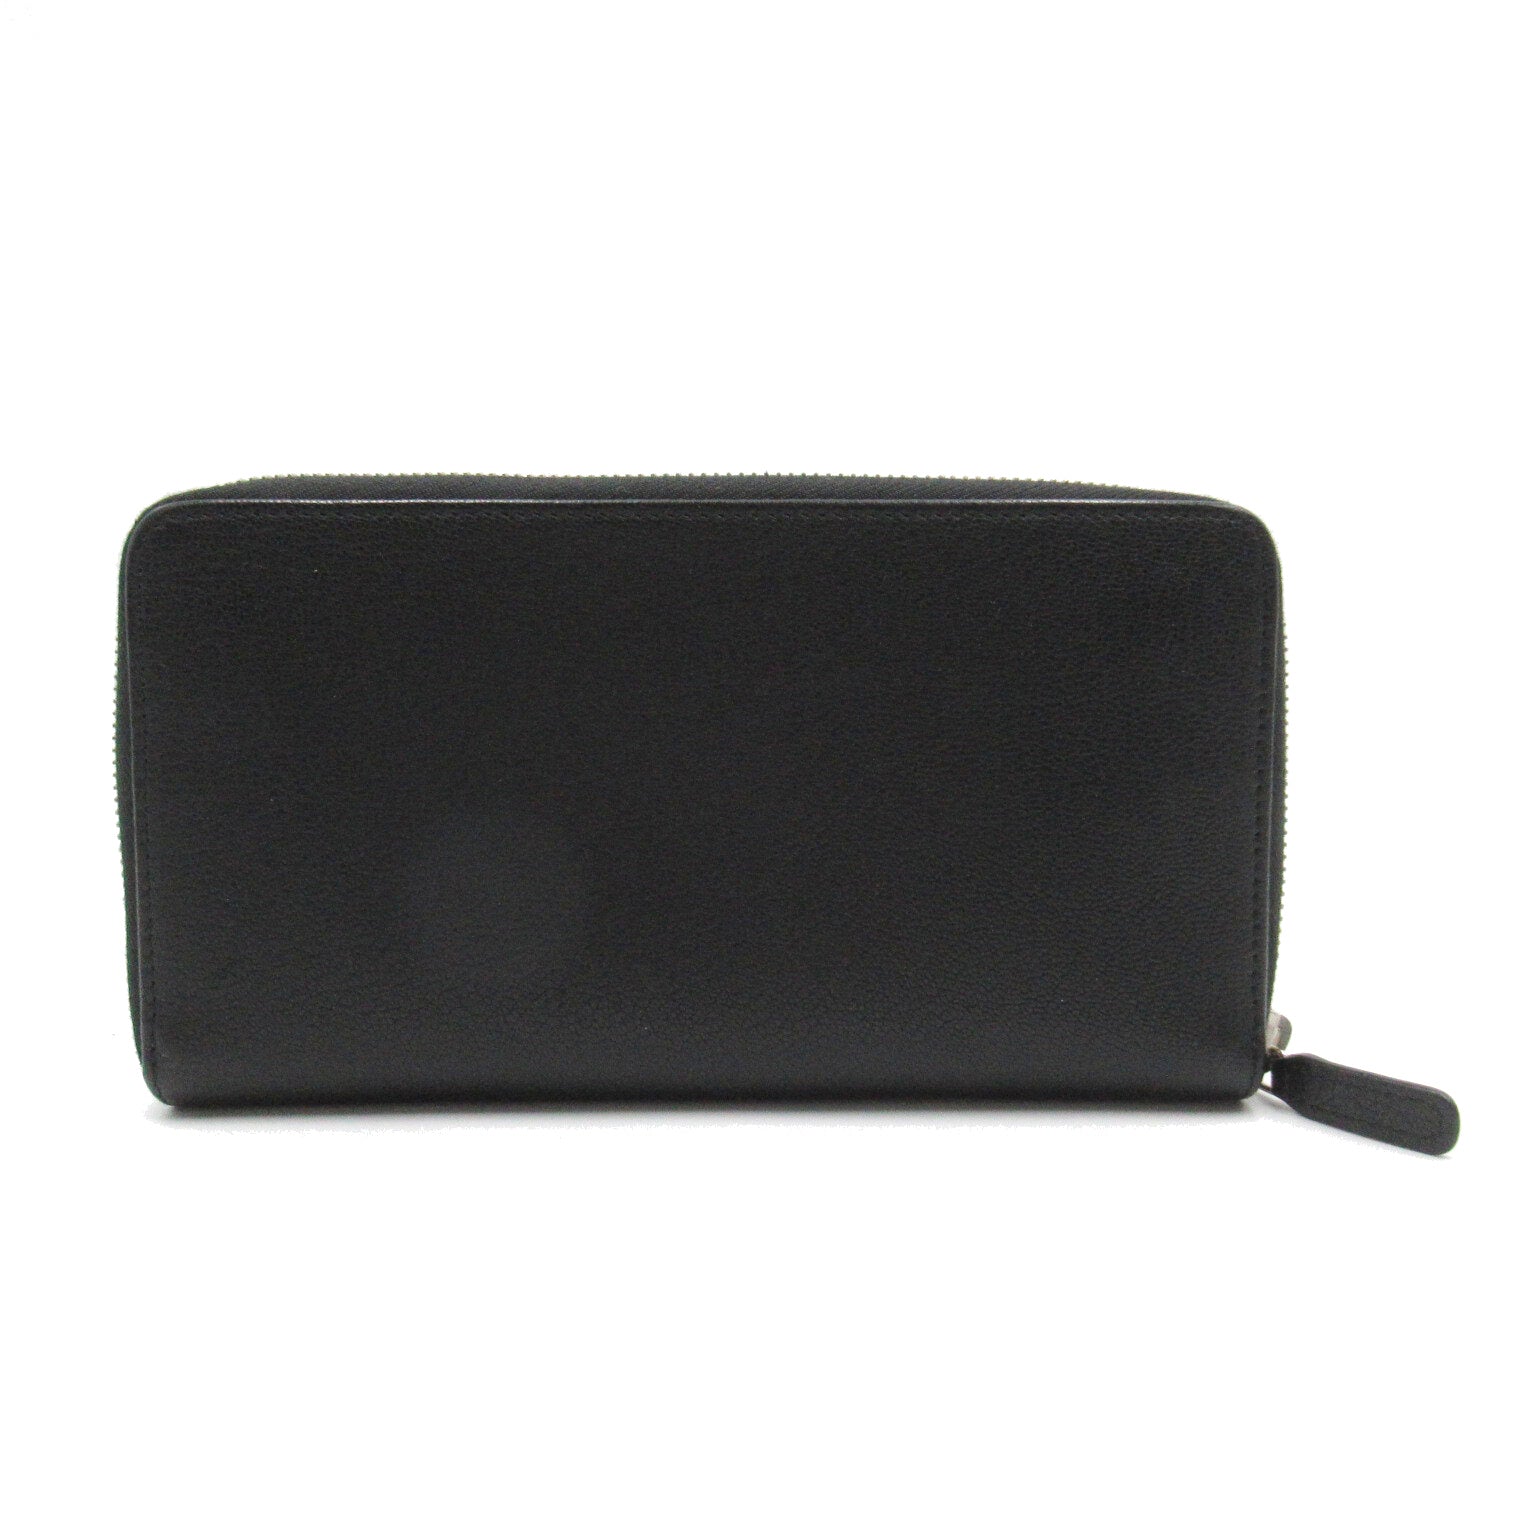 Chanel Round Long Wallet Round Long Wallet  Leather Women's Black Round Long Wallet